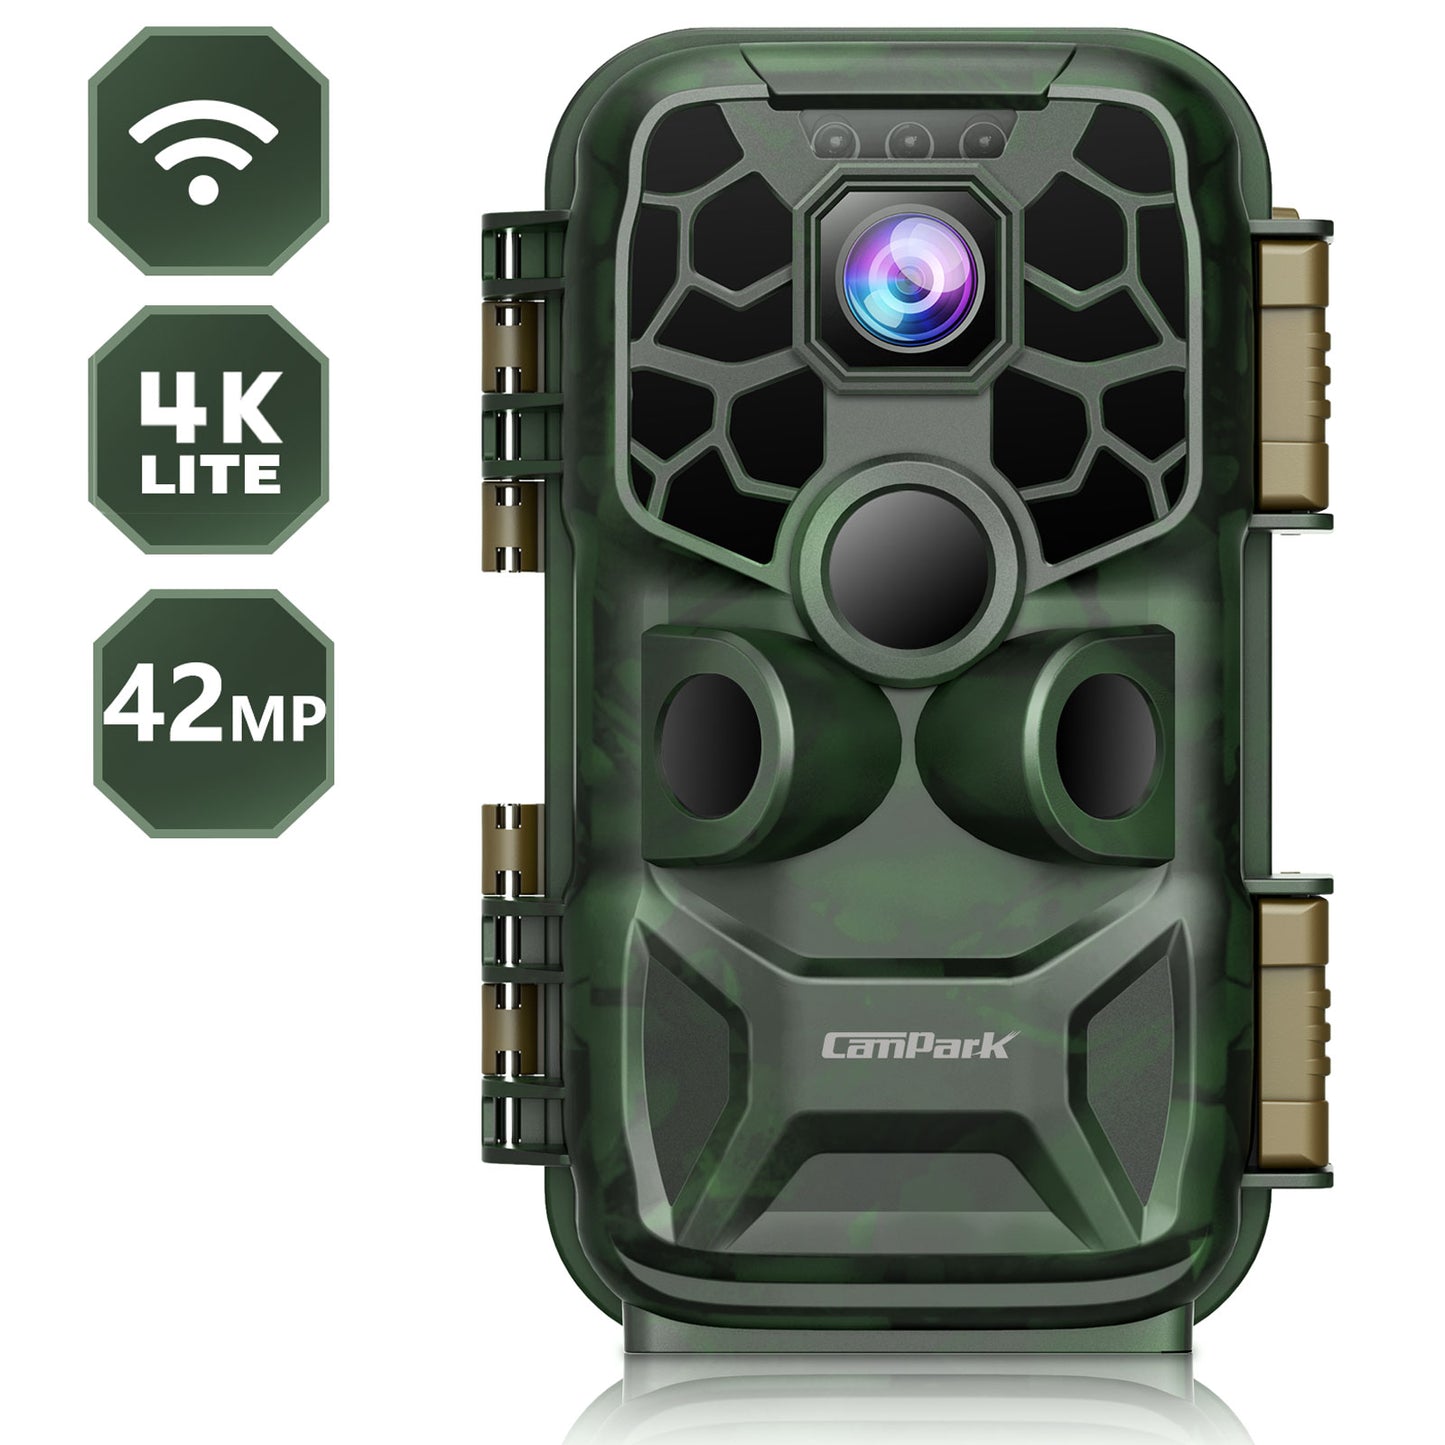 CAMPARK WiFi Trail Game Camera 4K 42MP Bluetooth Hunting Deer Camera with 3PIR Sensor Infrared Night Vision Waterproof IP66 0.2s Trigger 2.4" LCD Trail Cam for Wildlife Monitoring